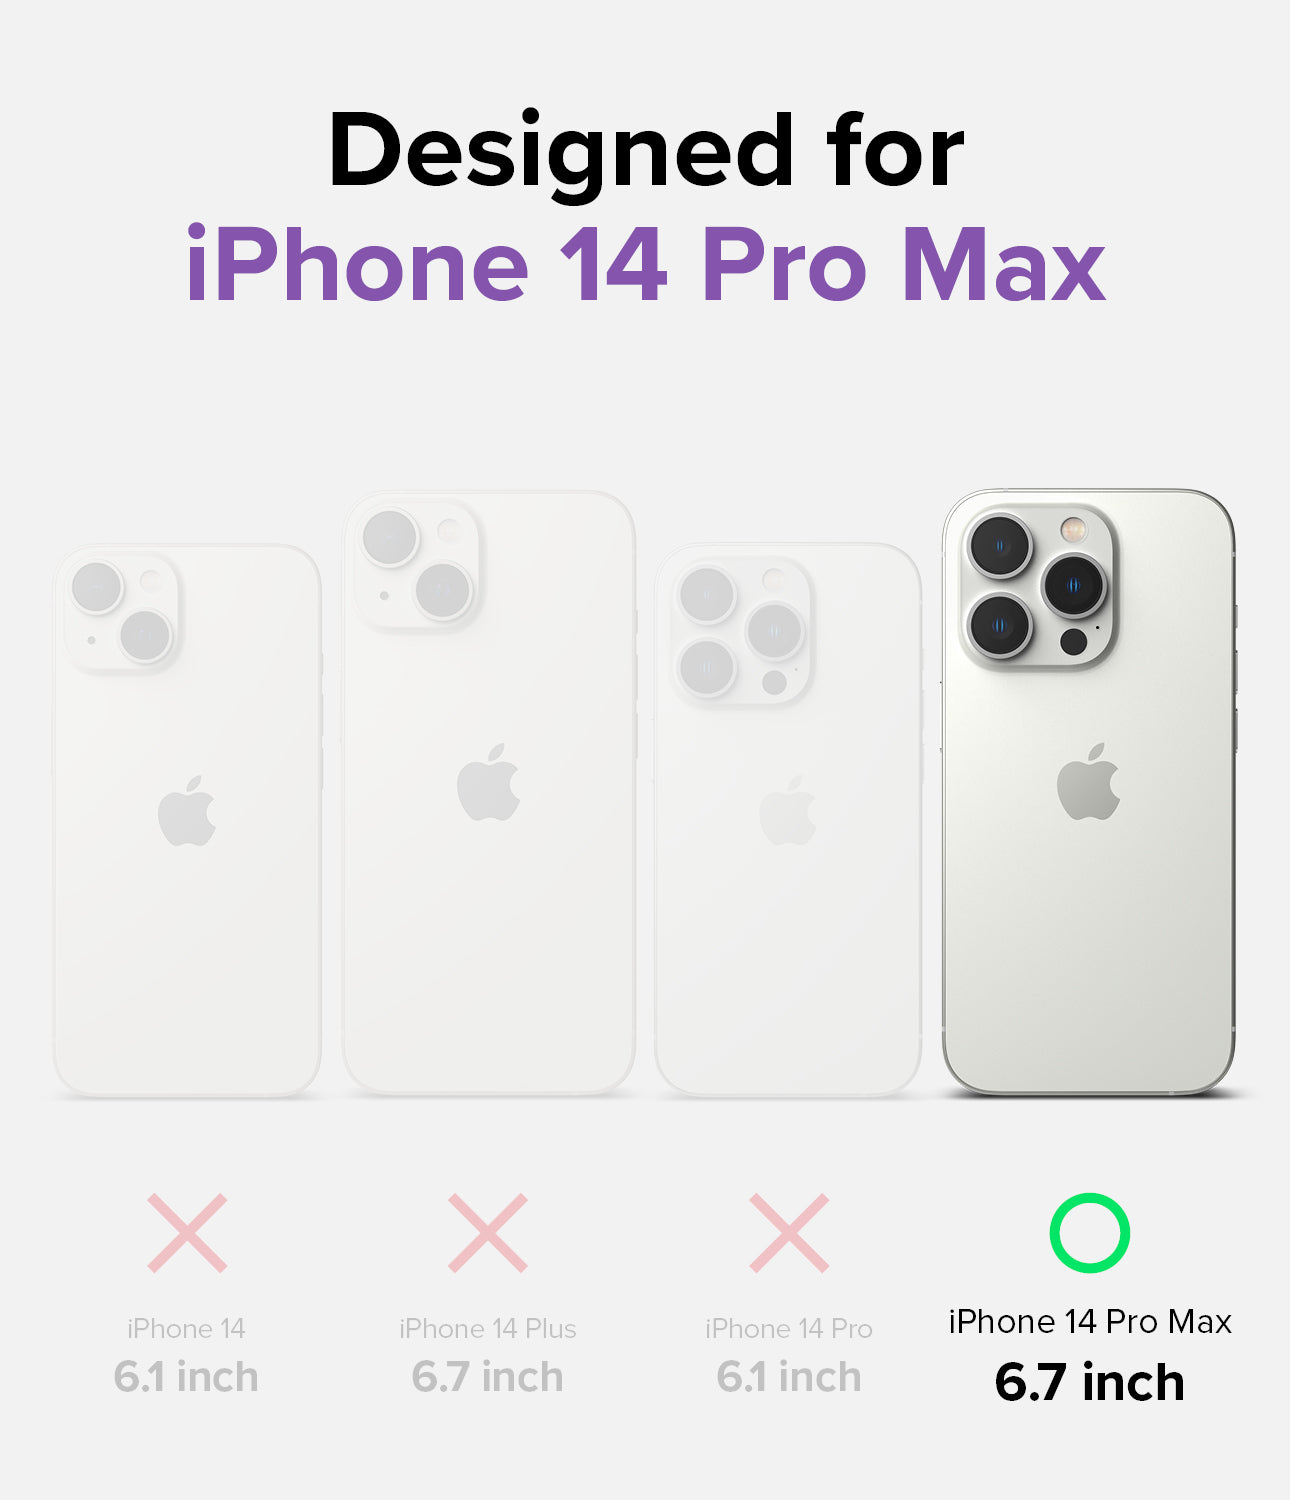 Designed for iPhone 14 Pro Max - 6.7 inch